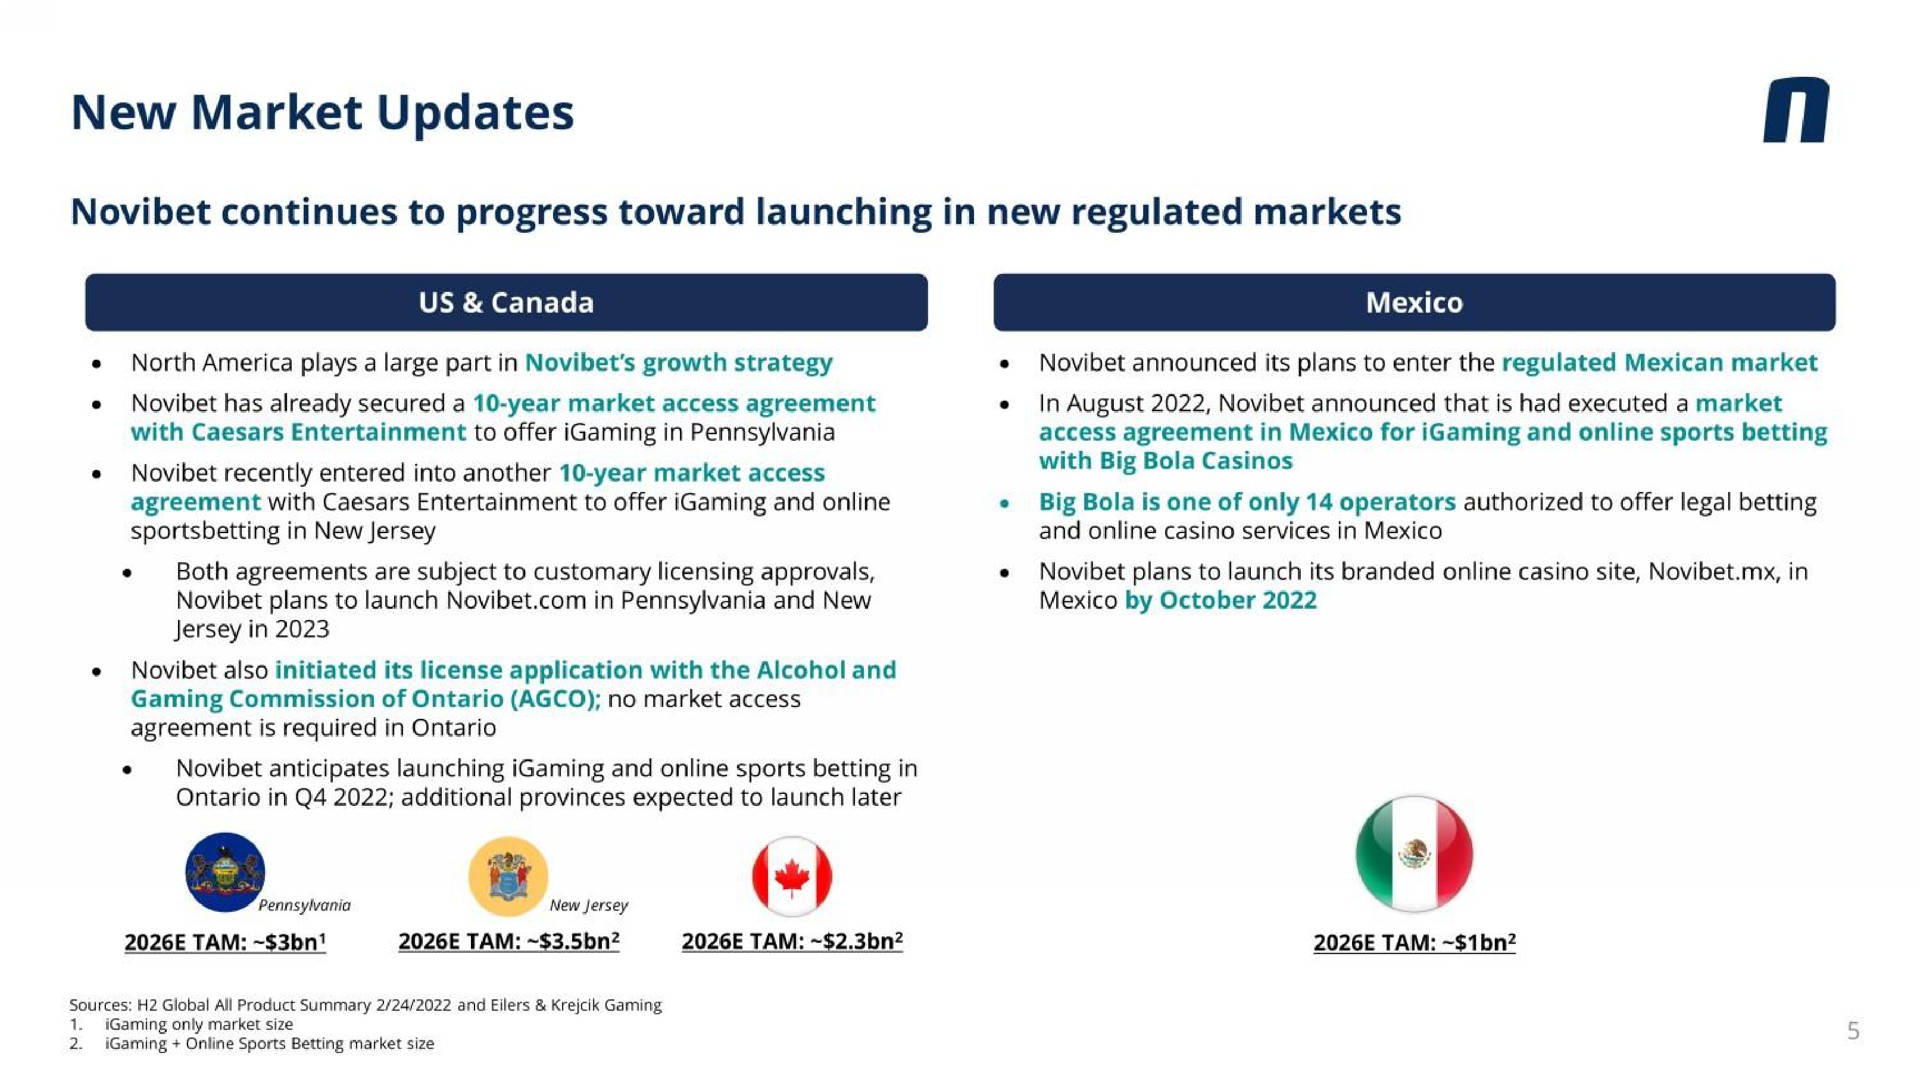 new market updates continues to progress toward launching in new regulated markets is | Novibet